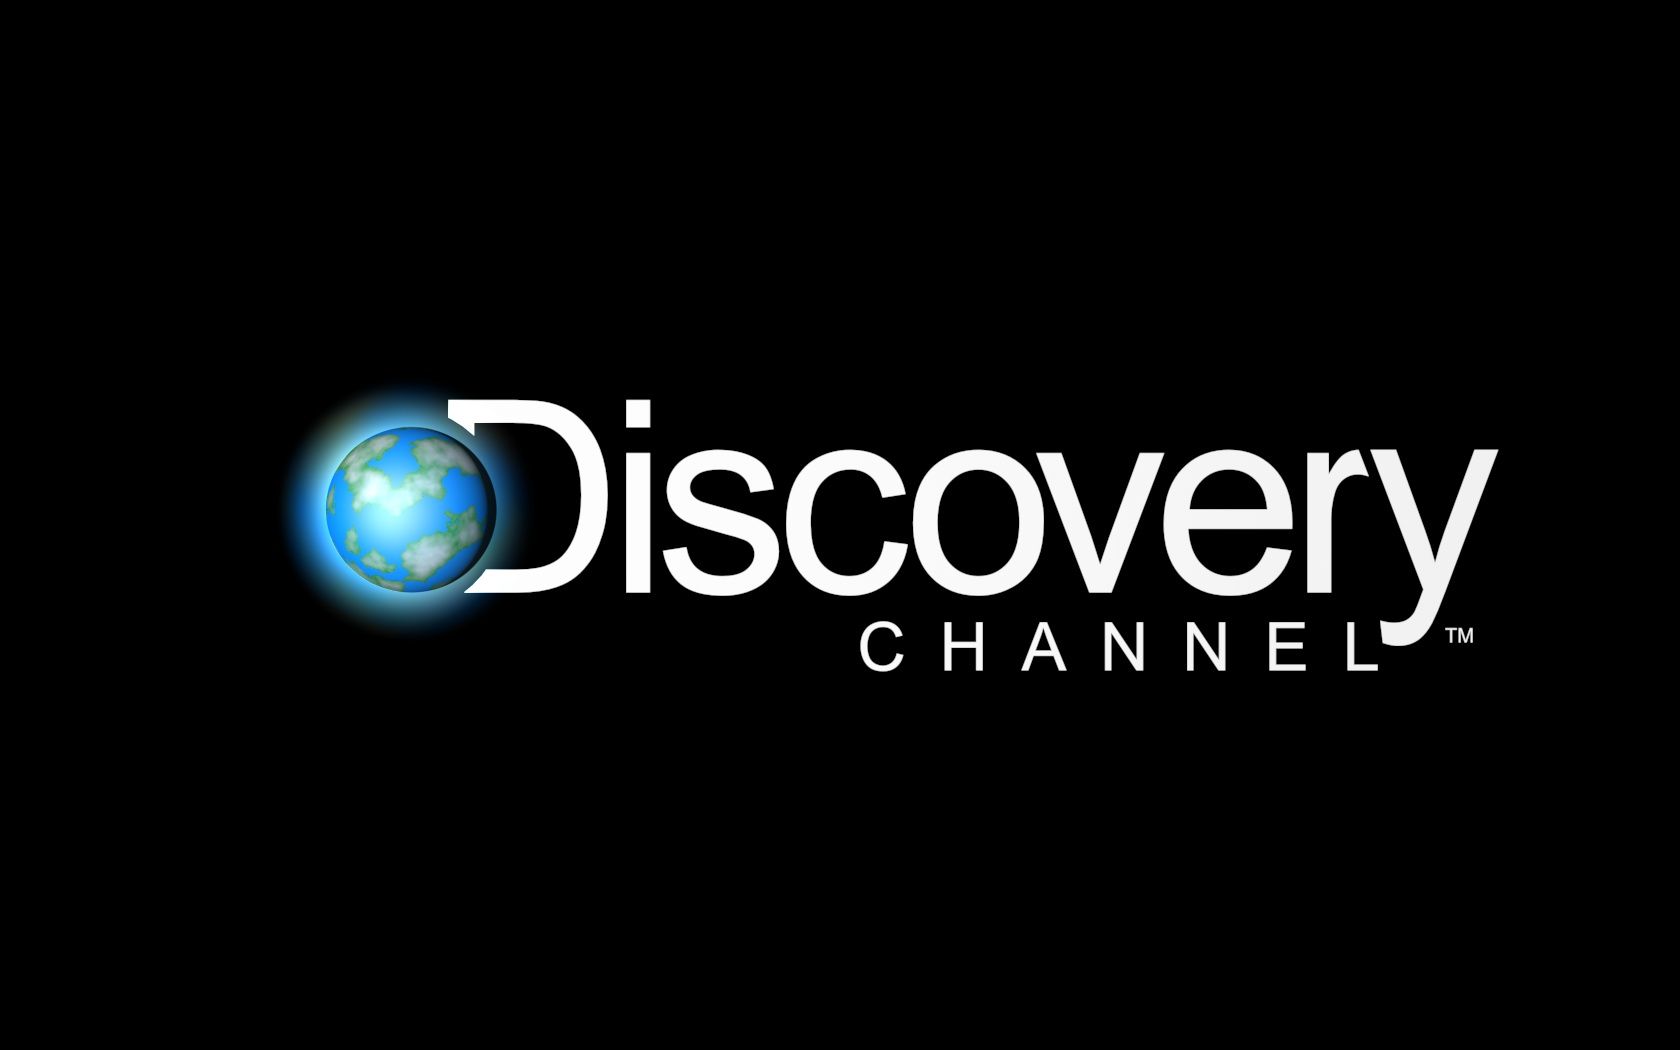 Discovery Channel Wallpaper